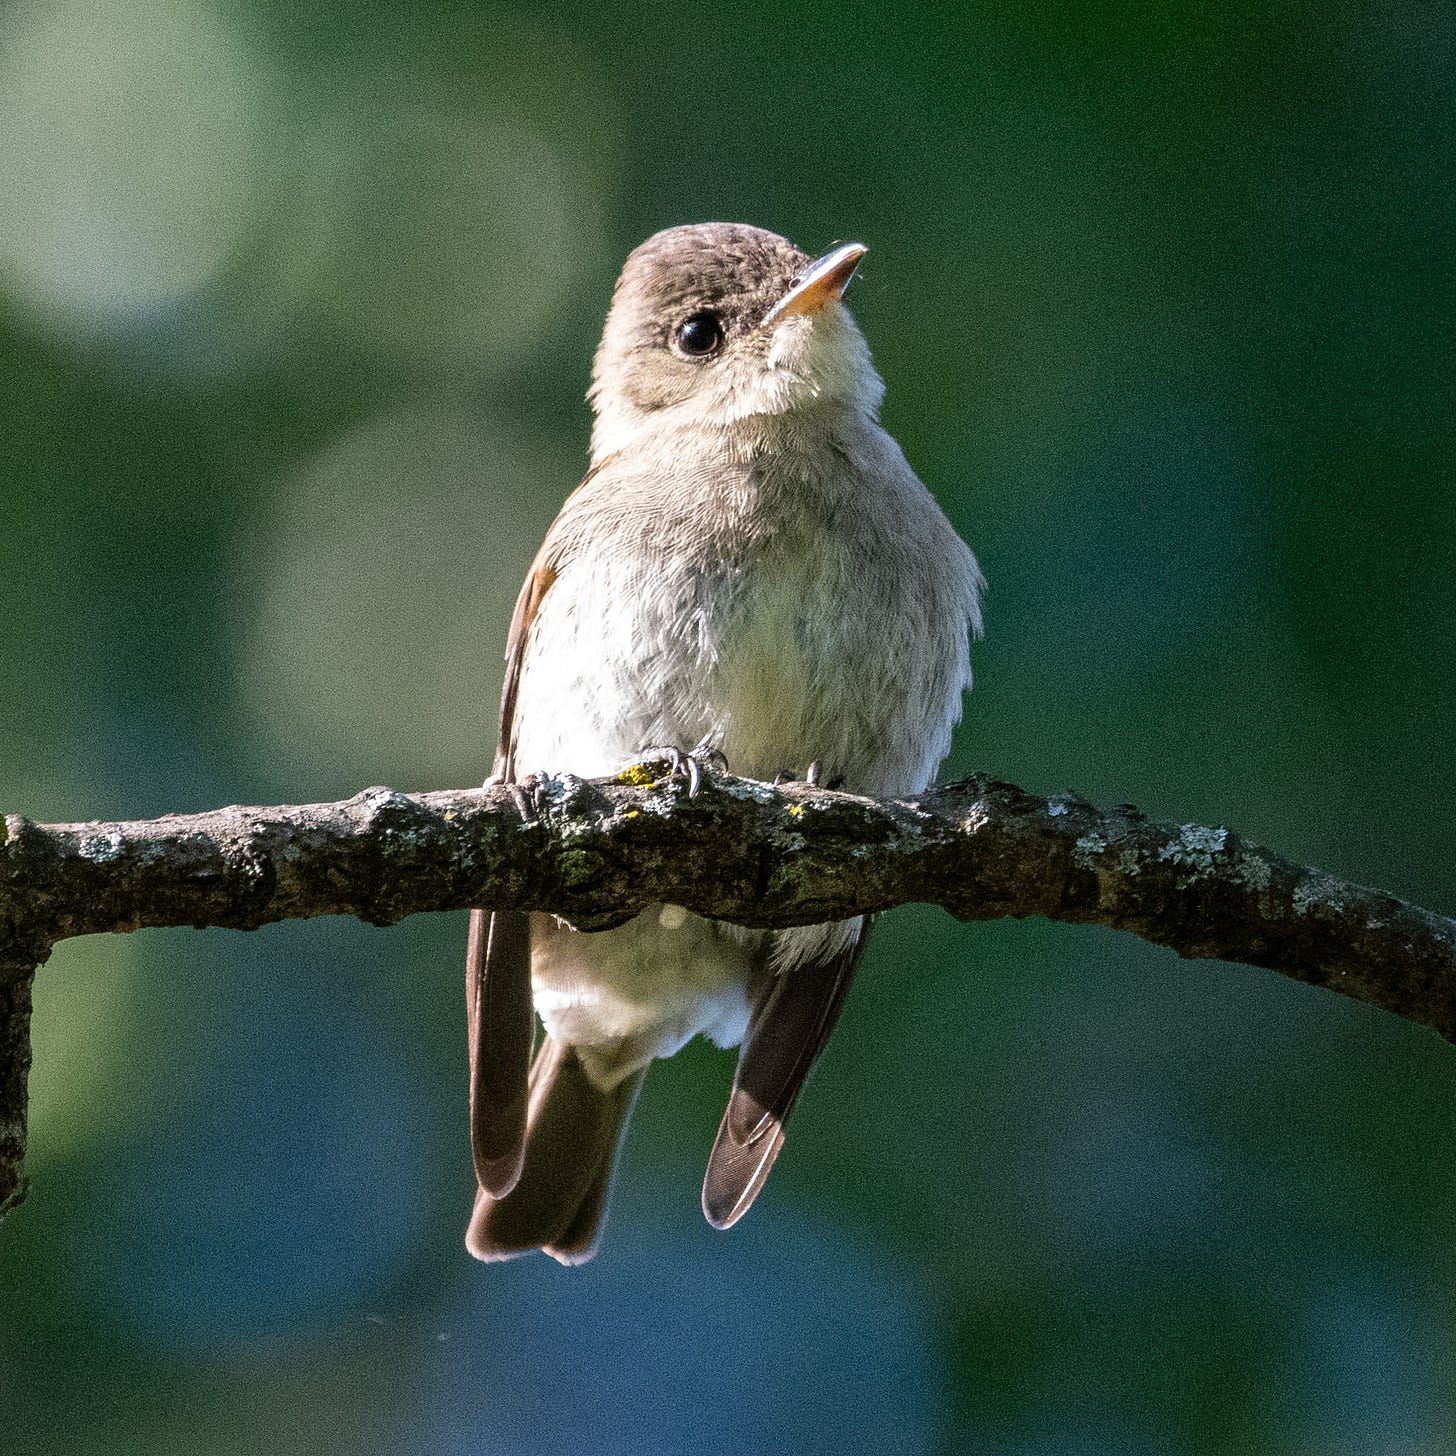 A perched Eastern wood-pewee at eye level